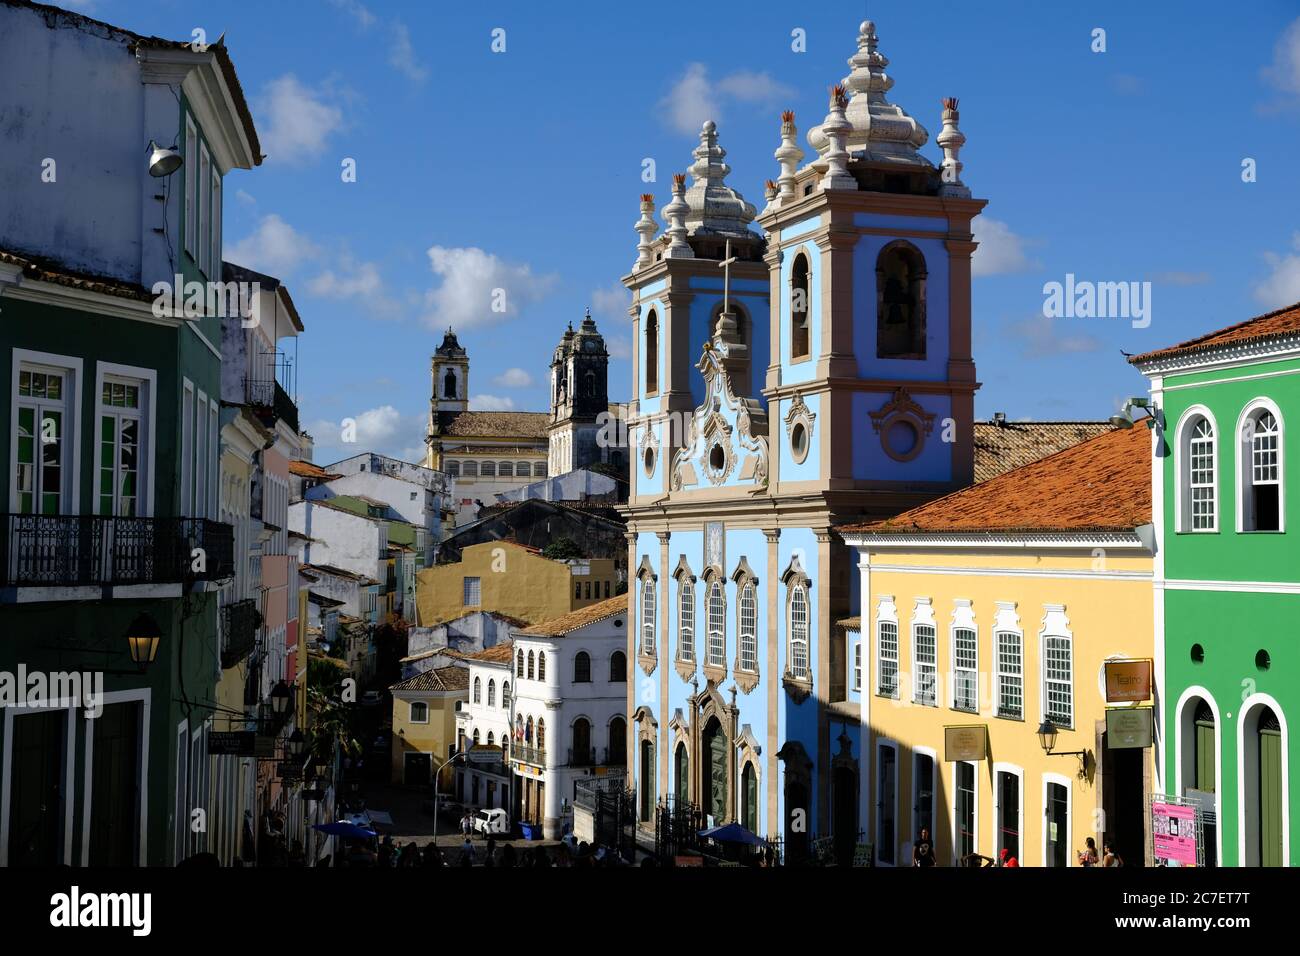 Salvador Bahia Brazil - Colorful old town colonial buildings Stock Photo